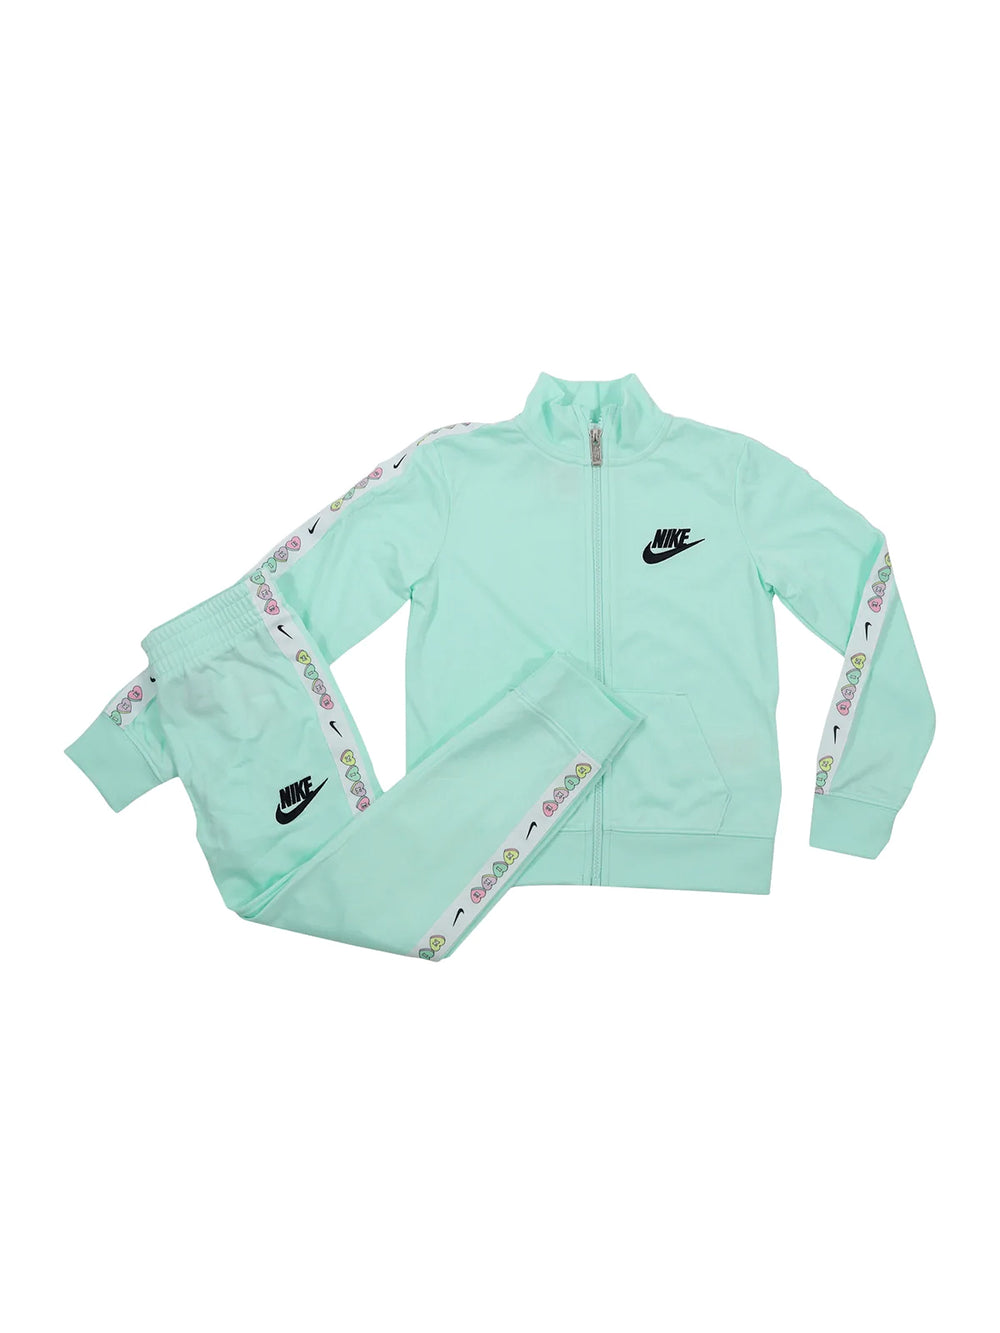 KIDS NIKE TRICOT TAPING SET - CLEARANCE